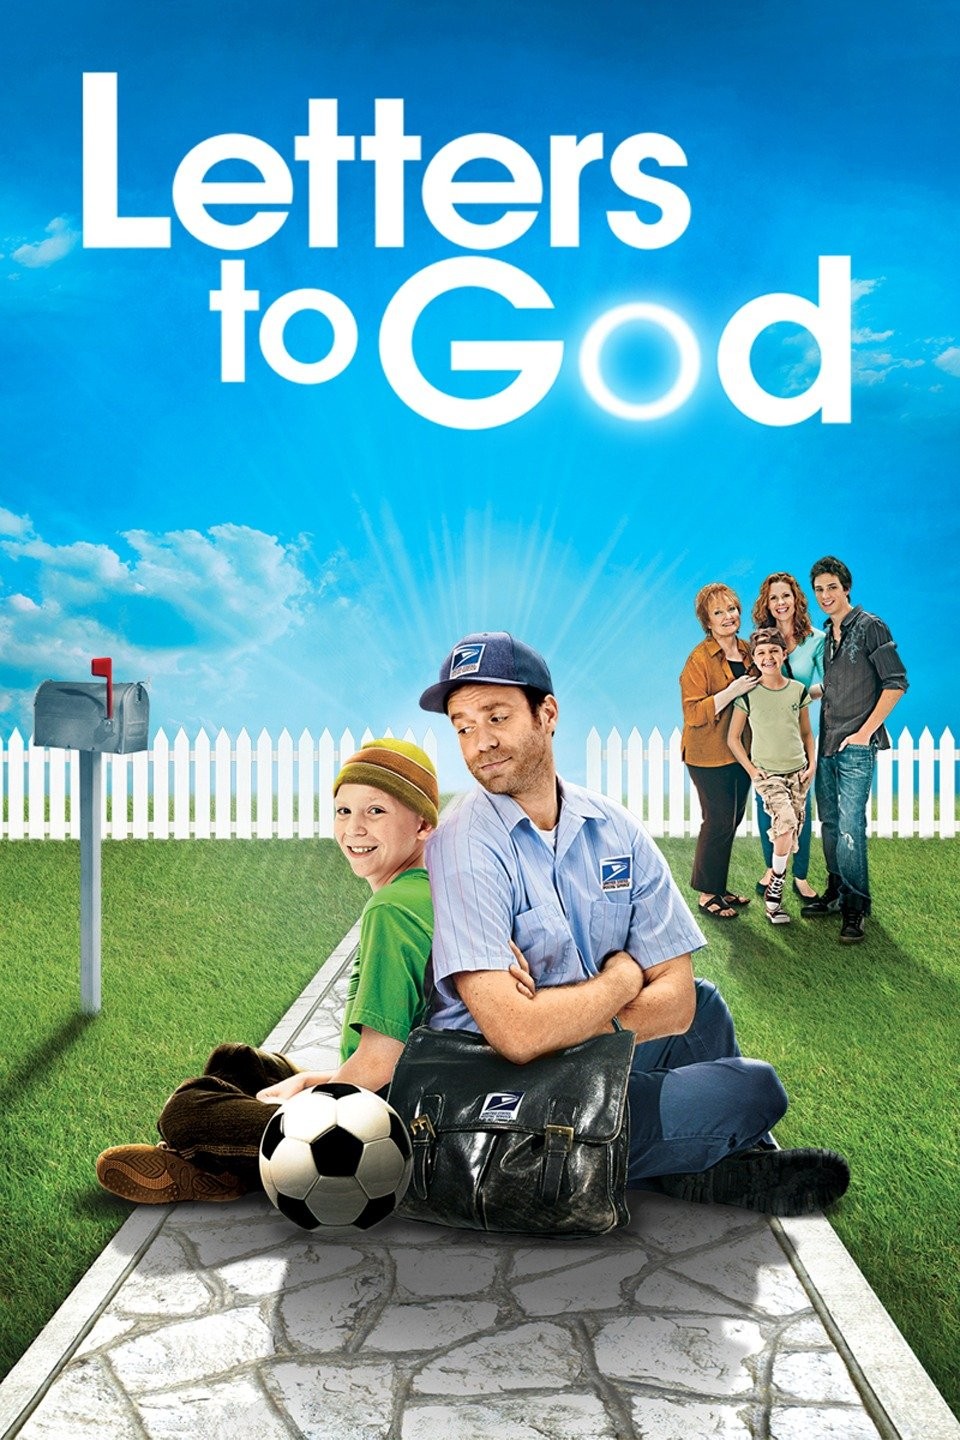 Playing God - Rotten Tomatoes